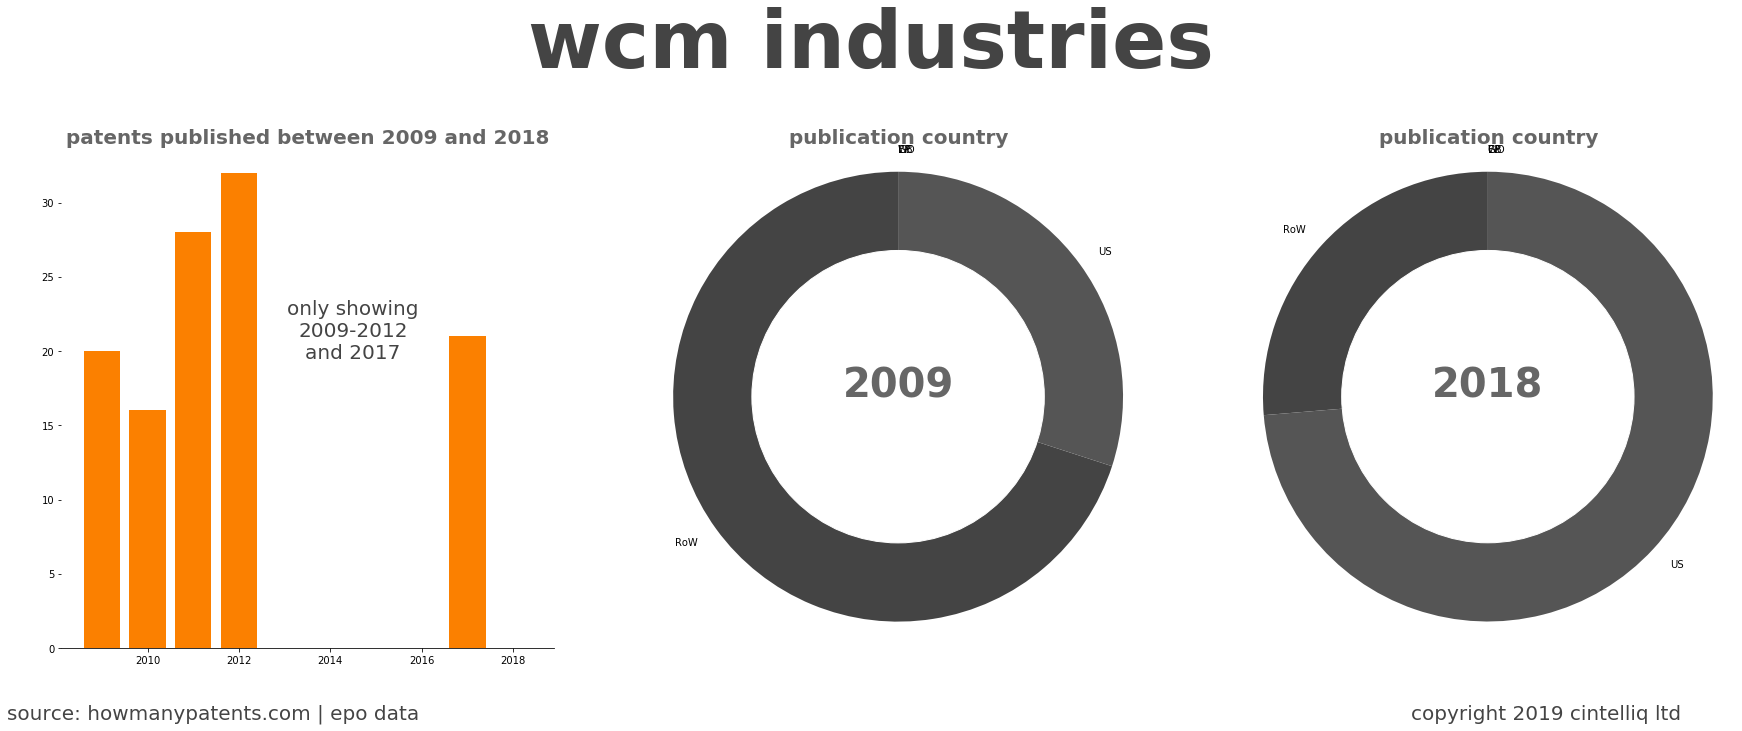 summary of patents for Wcm Industries